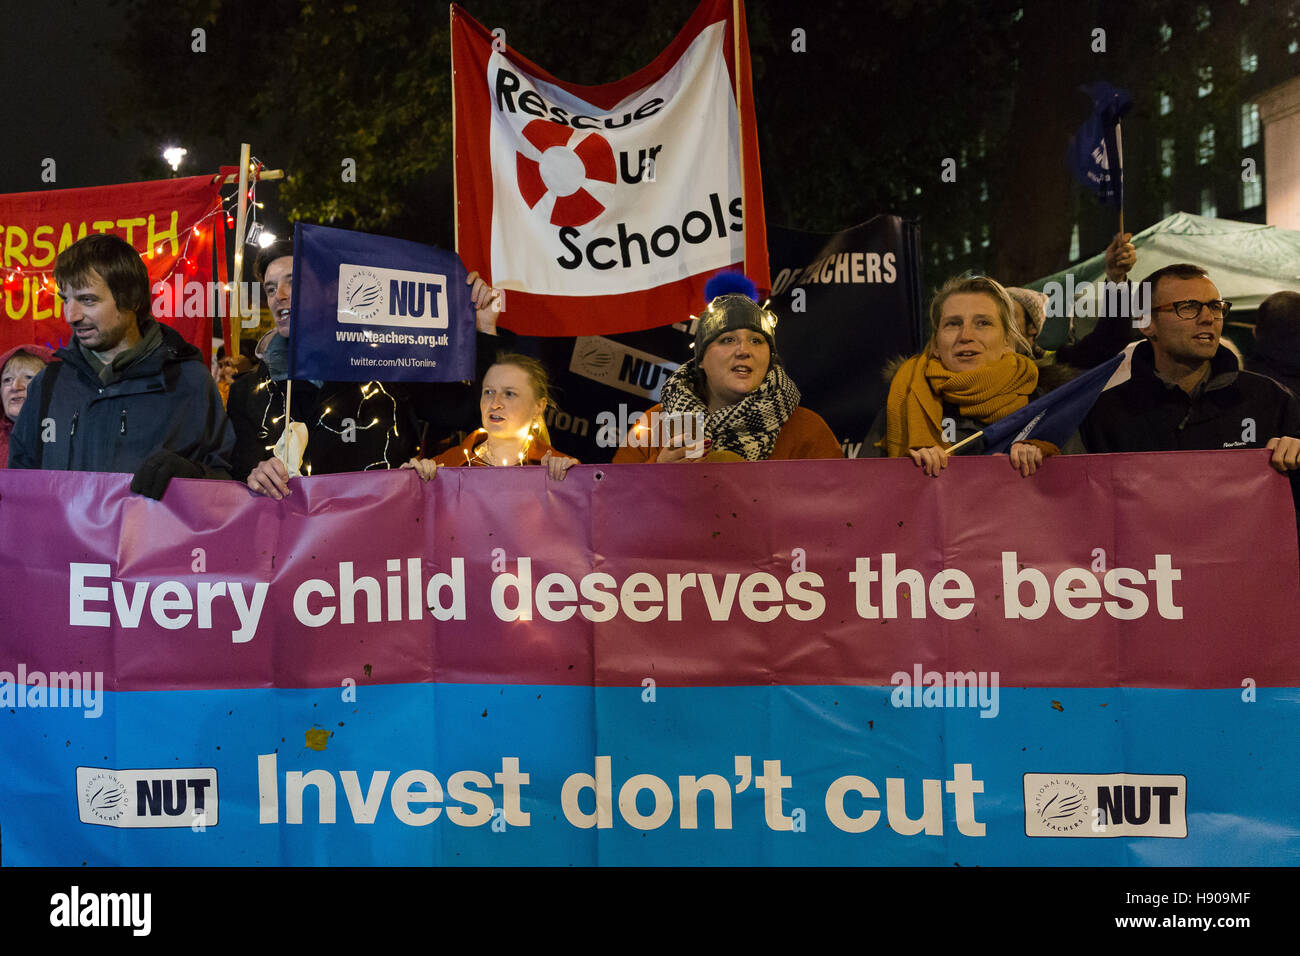 London, UK. 17th Nov 2016. Protesters outside Downing Street. Teachers from the National Union of Teachers (NUT), school governors and support staff staged a protest rally against government cuts in education funding outside Downing Street in Westminster before marching past the Department for Education this evening. Protesters are demanding and increase in education funding in the upcoming budget to ensure that every child gets the best education. Credit:  Vickie Flores/Alamy Live News Stock Photo